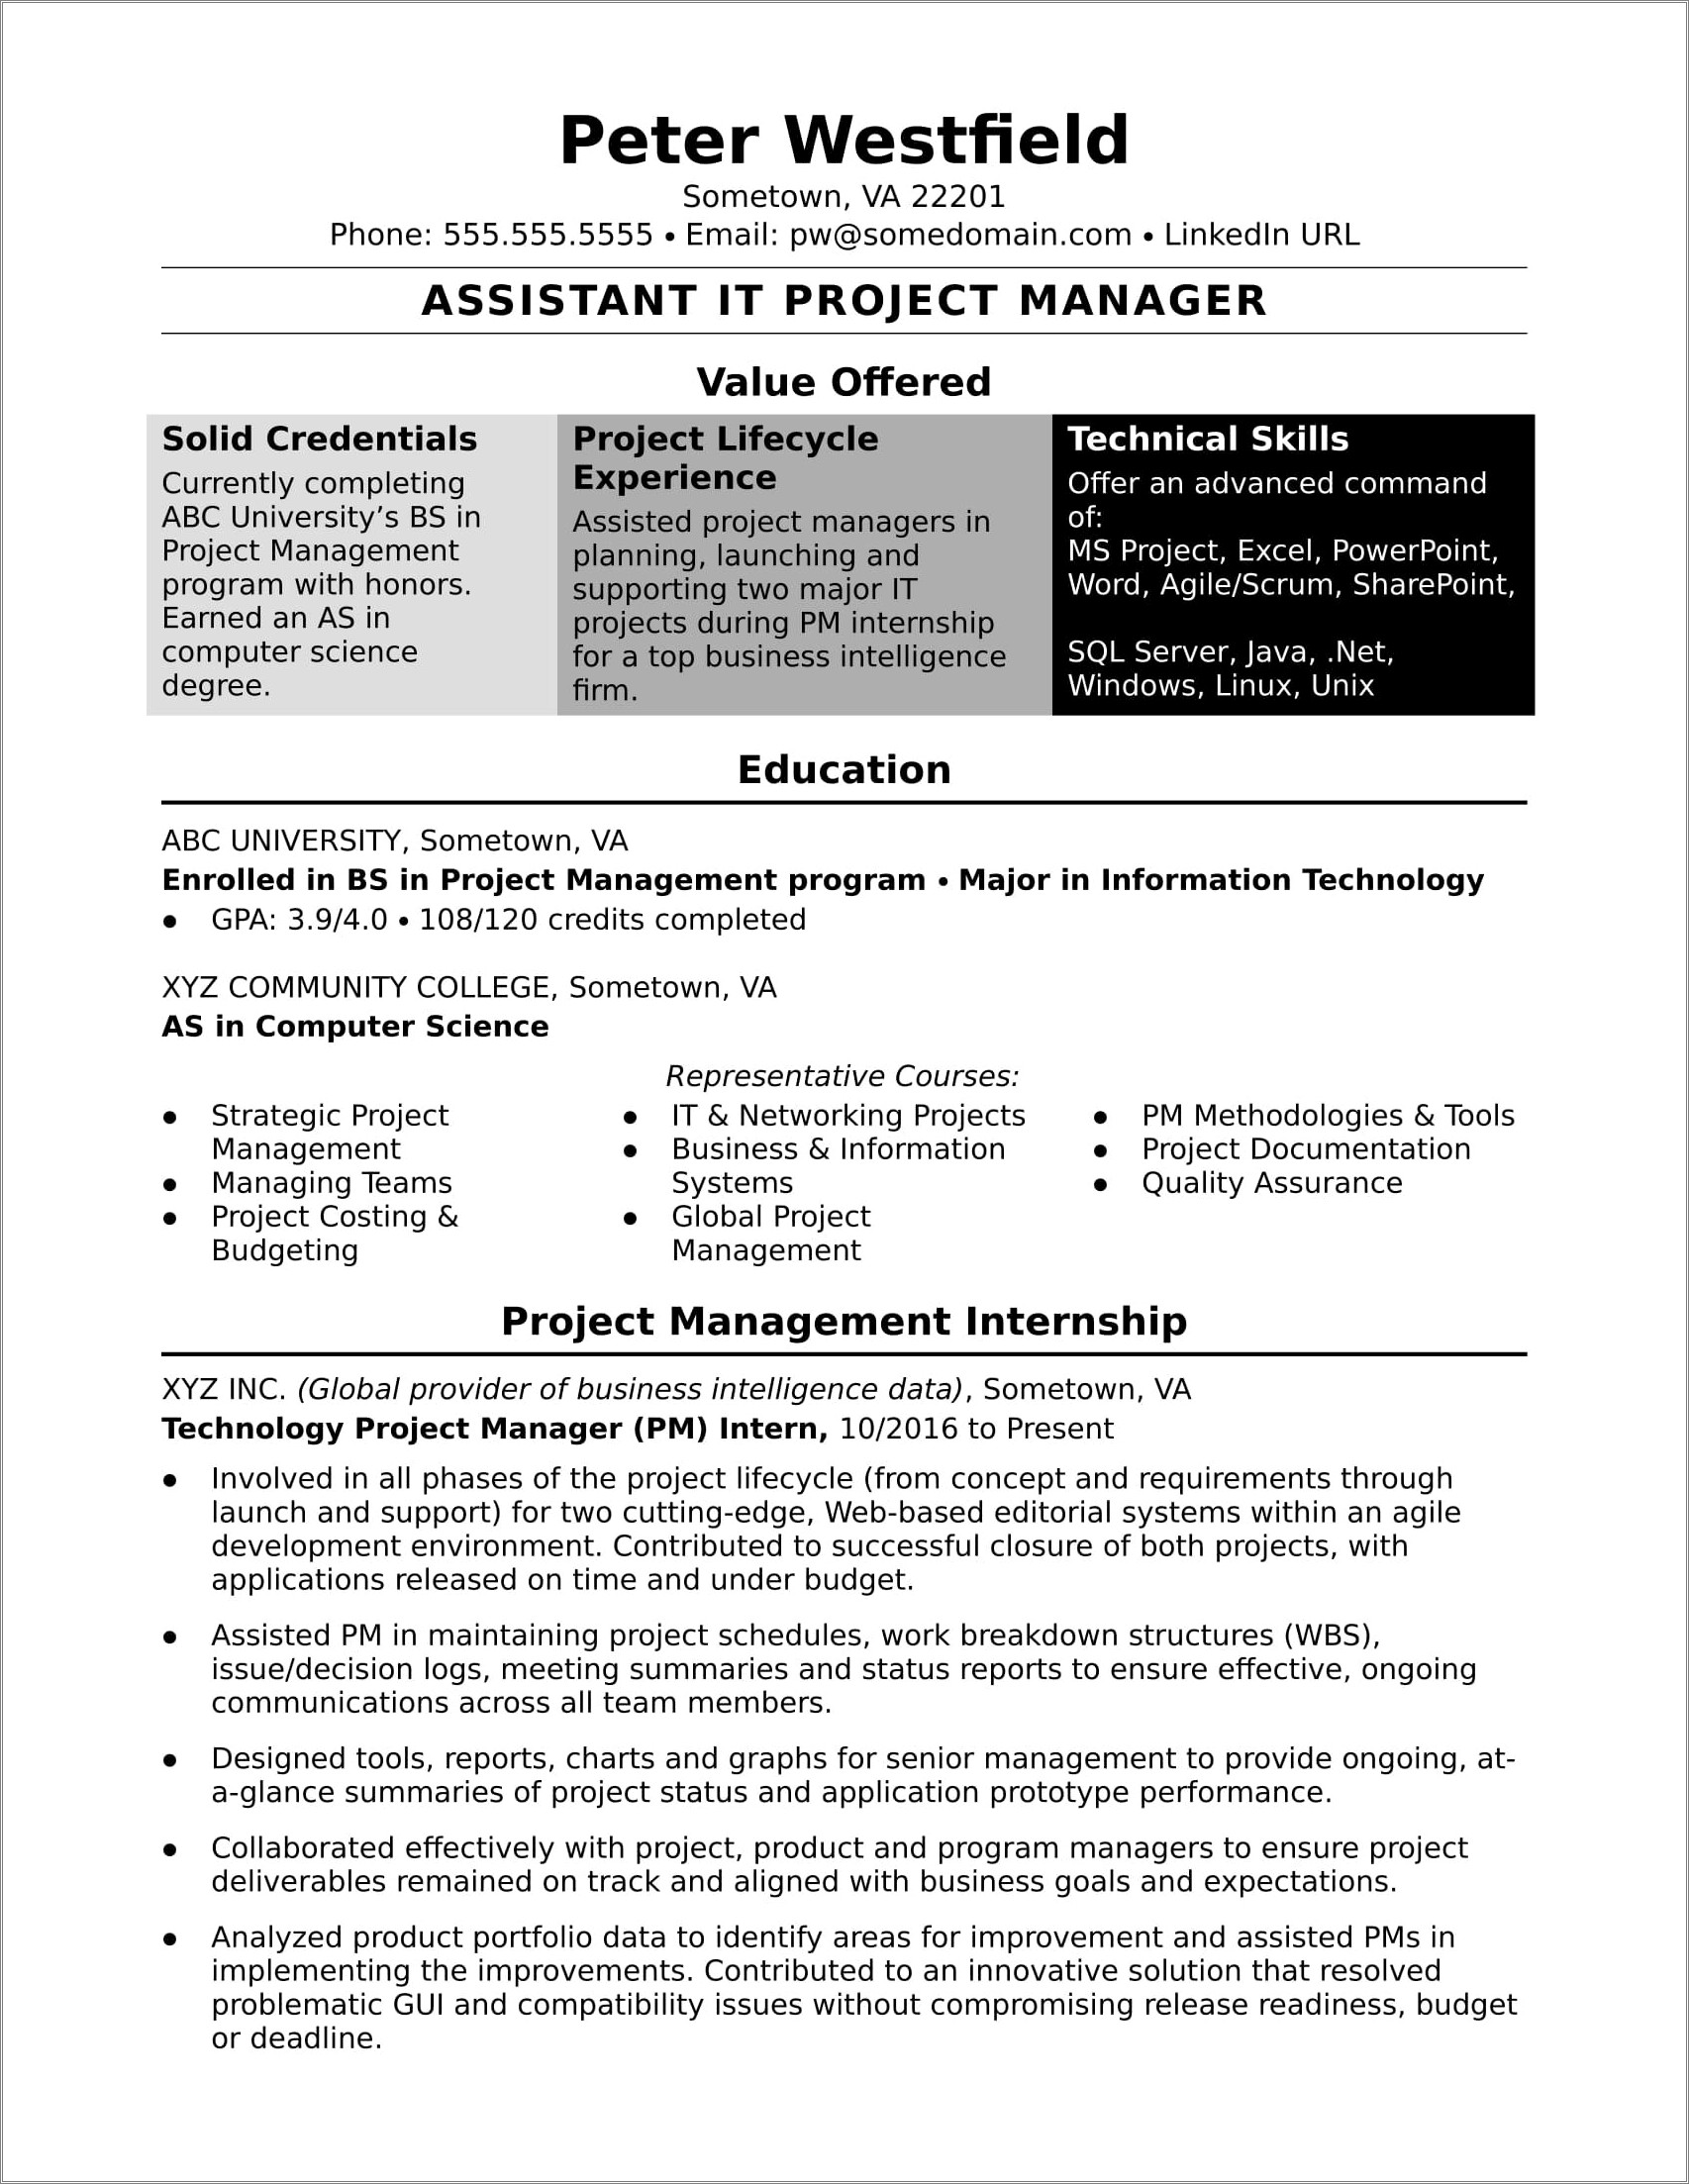 Resume Objective Statement Examples Information Technology